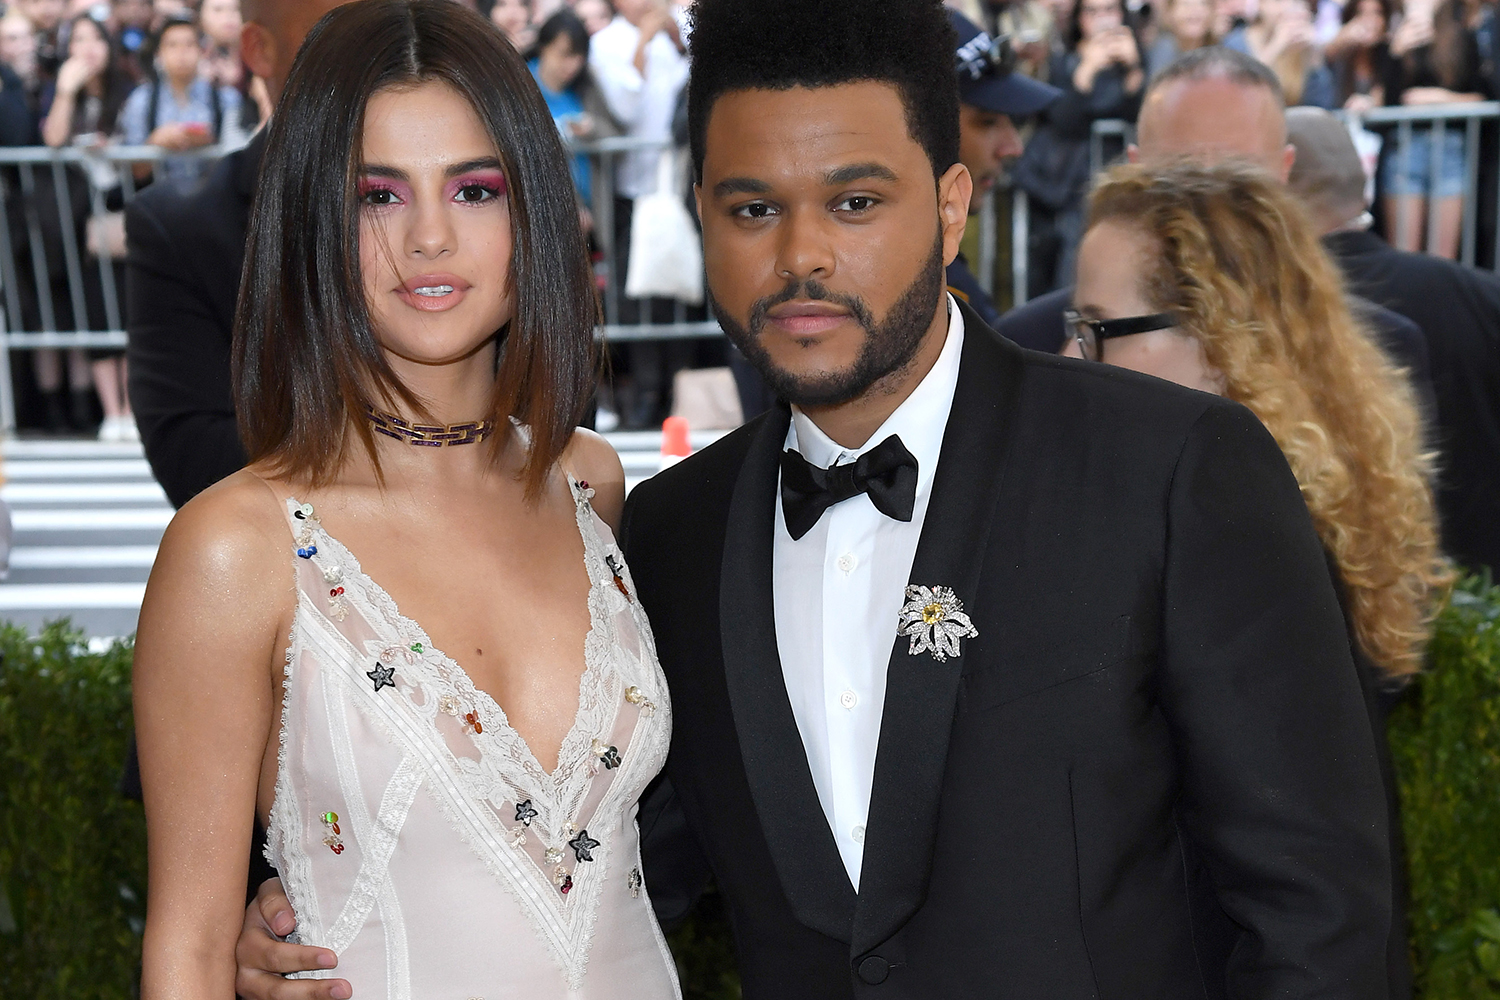 Selena Gomez And The Weeknd Have Finally Taken That Next Step In Their Relationship